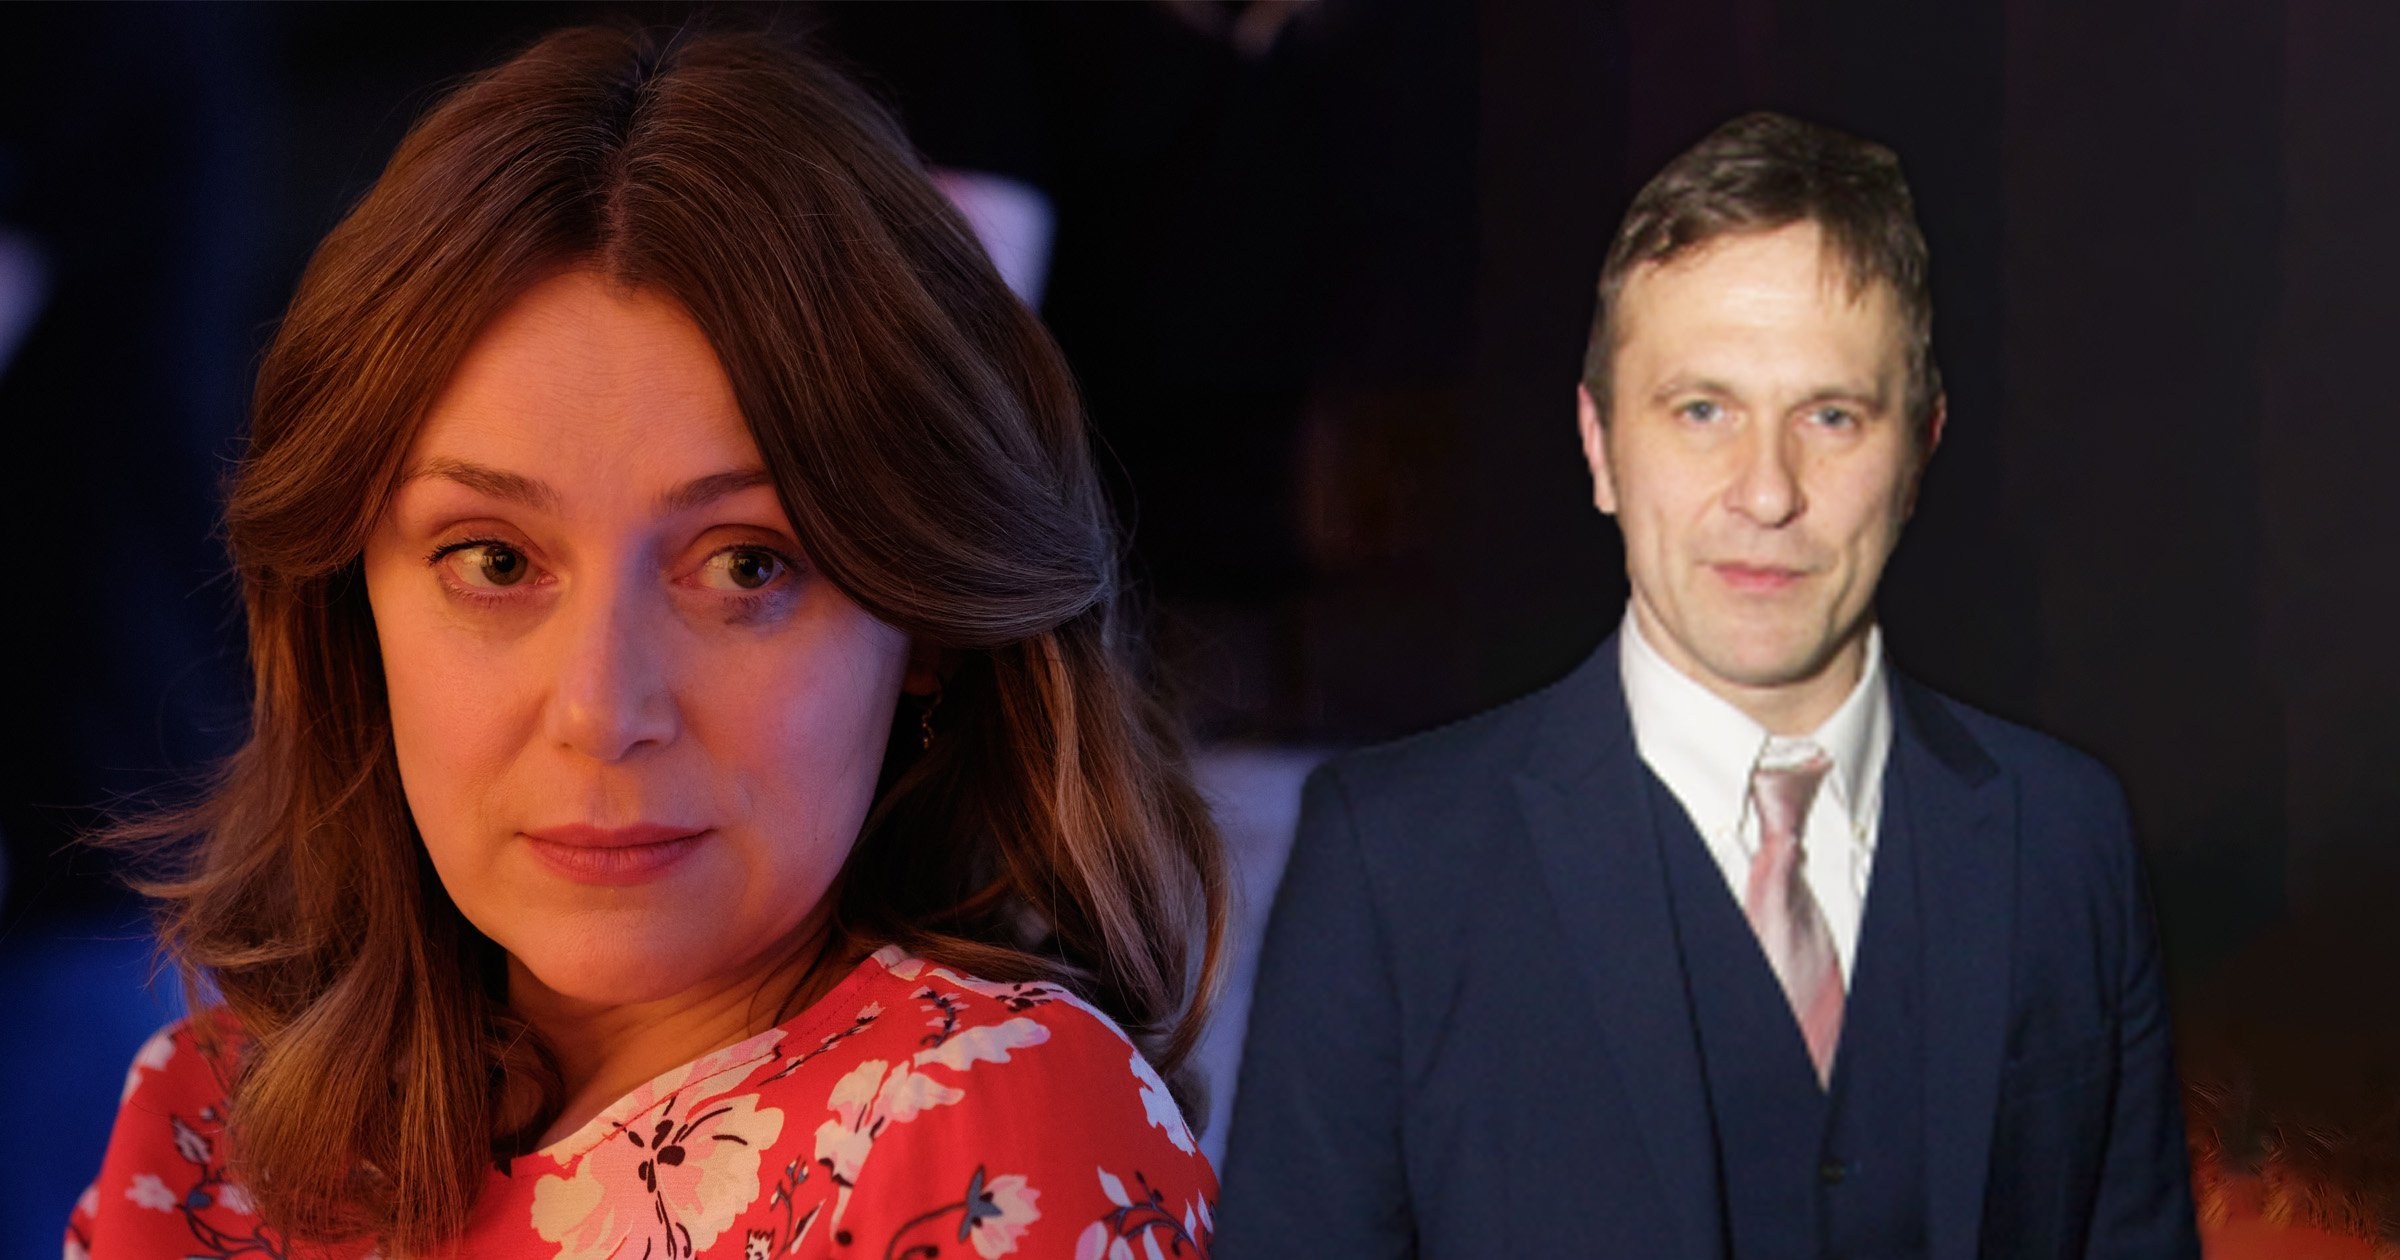 Finding Alice: Mystery surrounding Keeley Hawes’ character’s late husband leaves viewers baffled